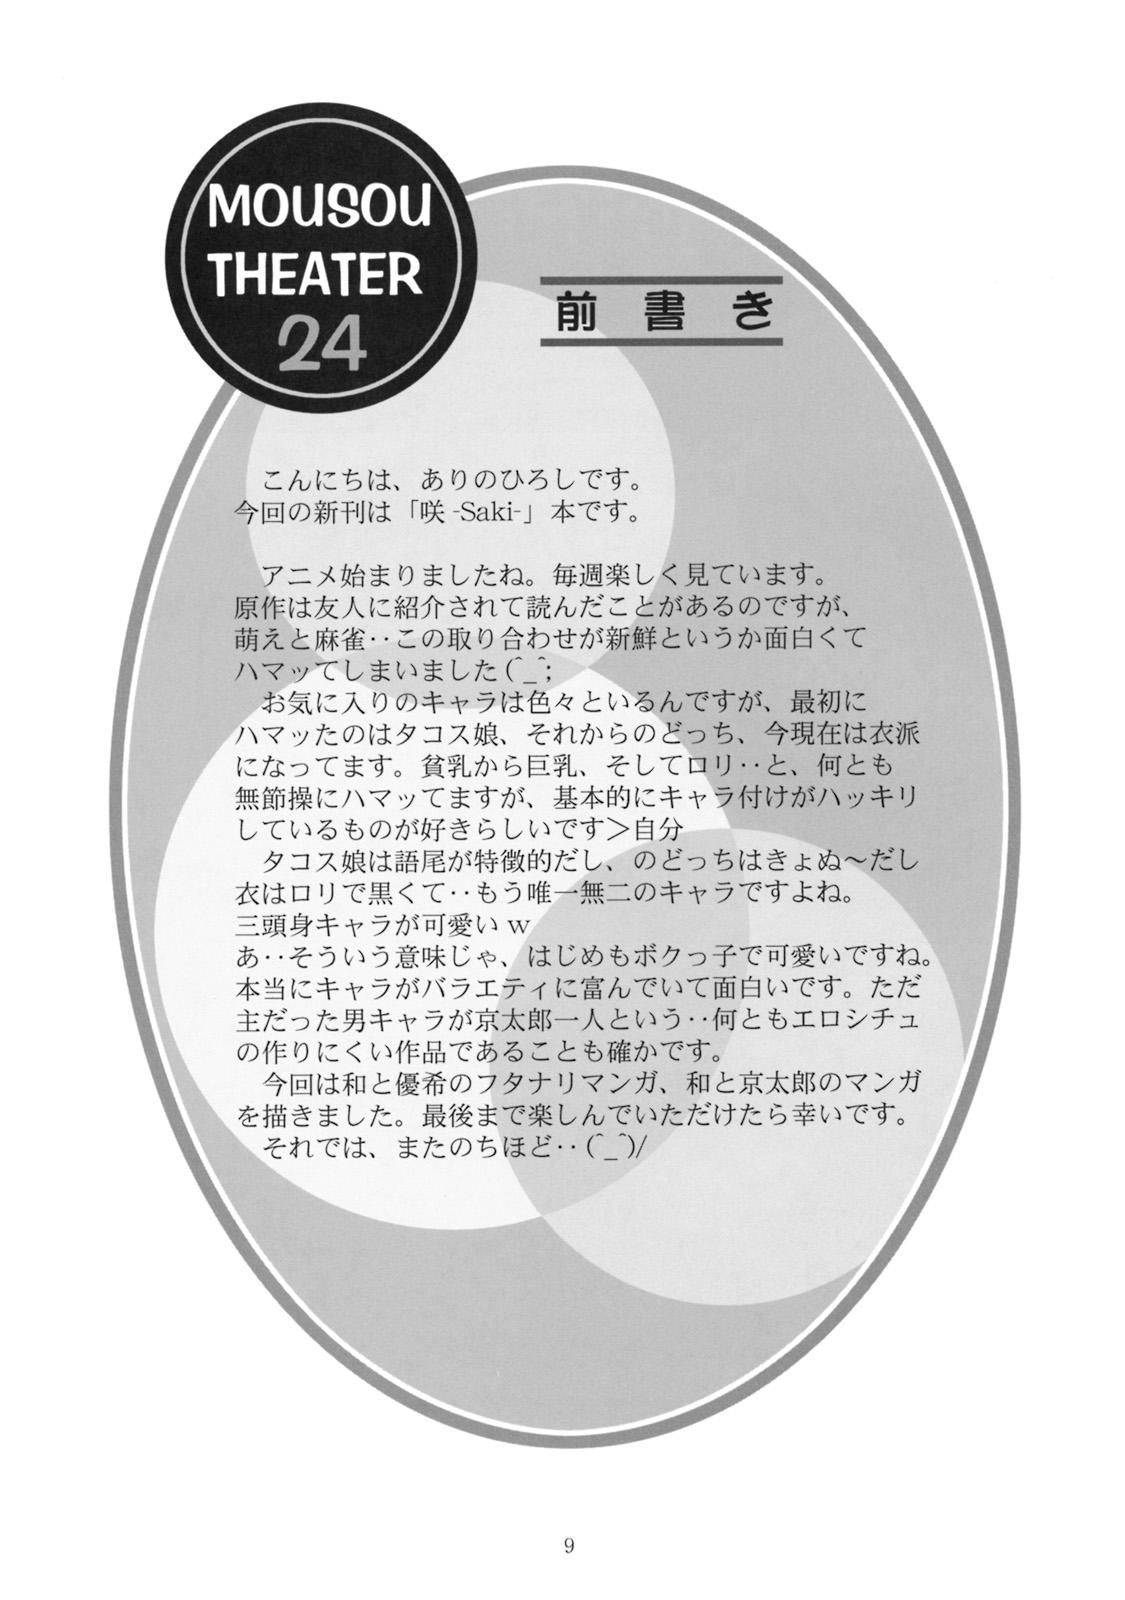 MOUSOU THEATER 24 7